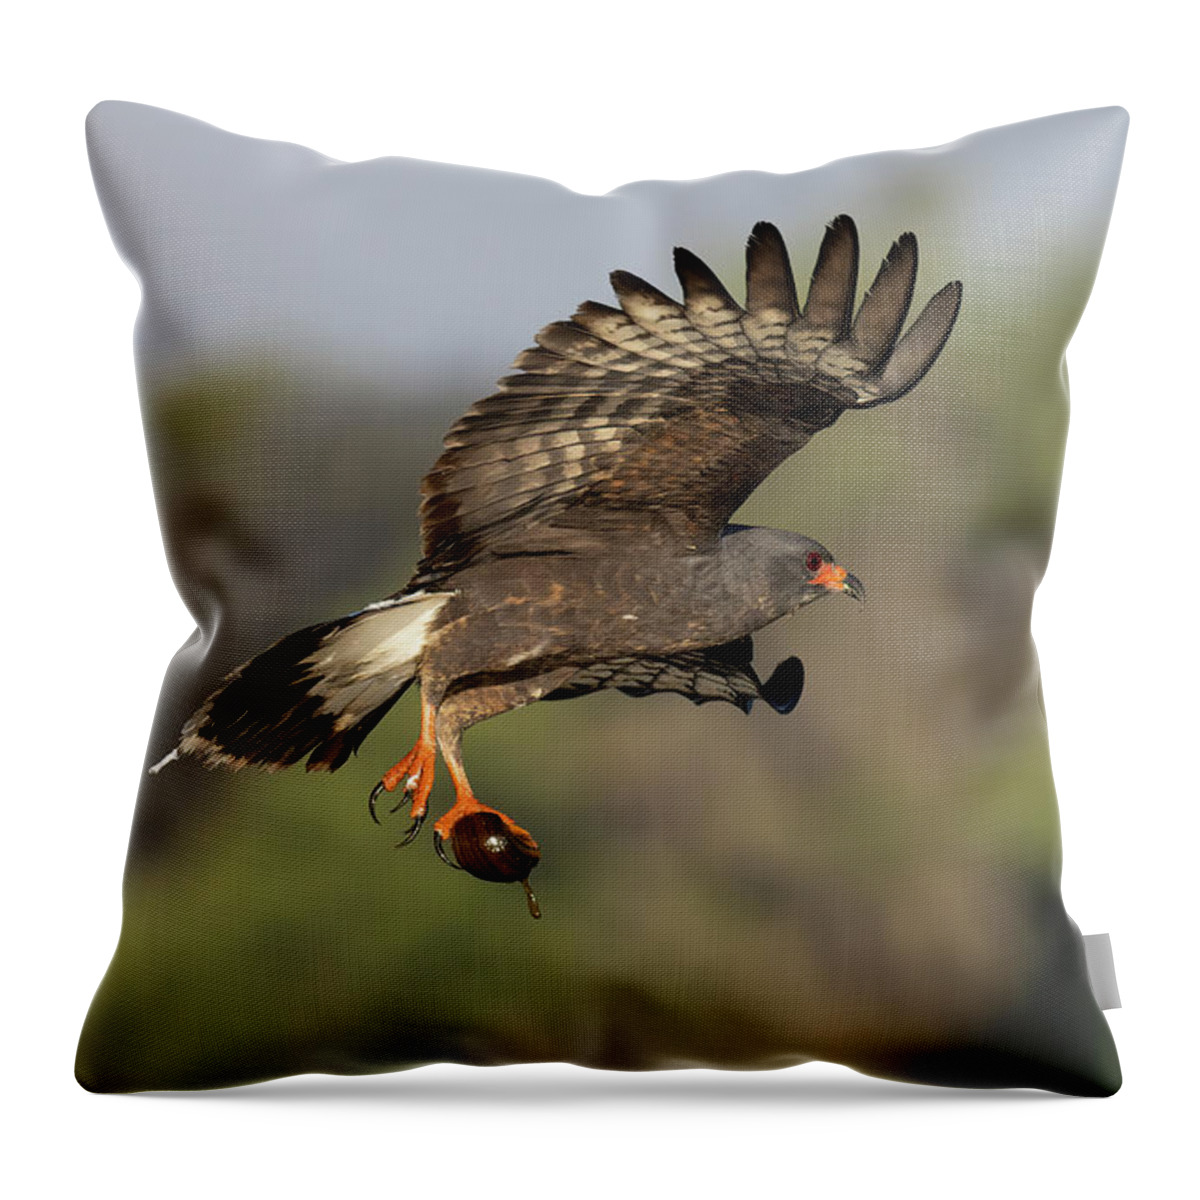 Snail Kite Throw Pillow featuring the photograph The Escape by RD Allen